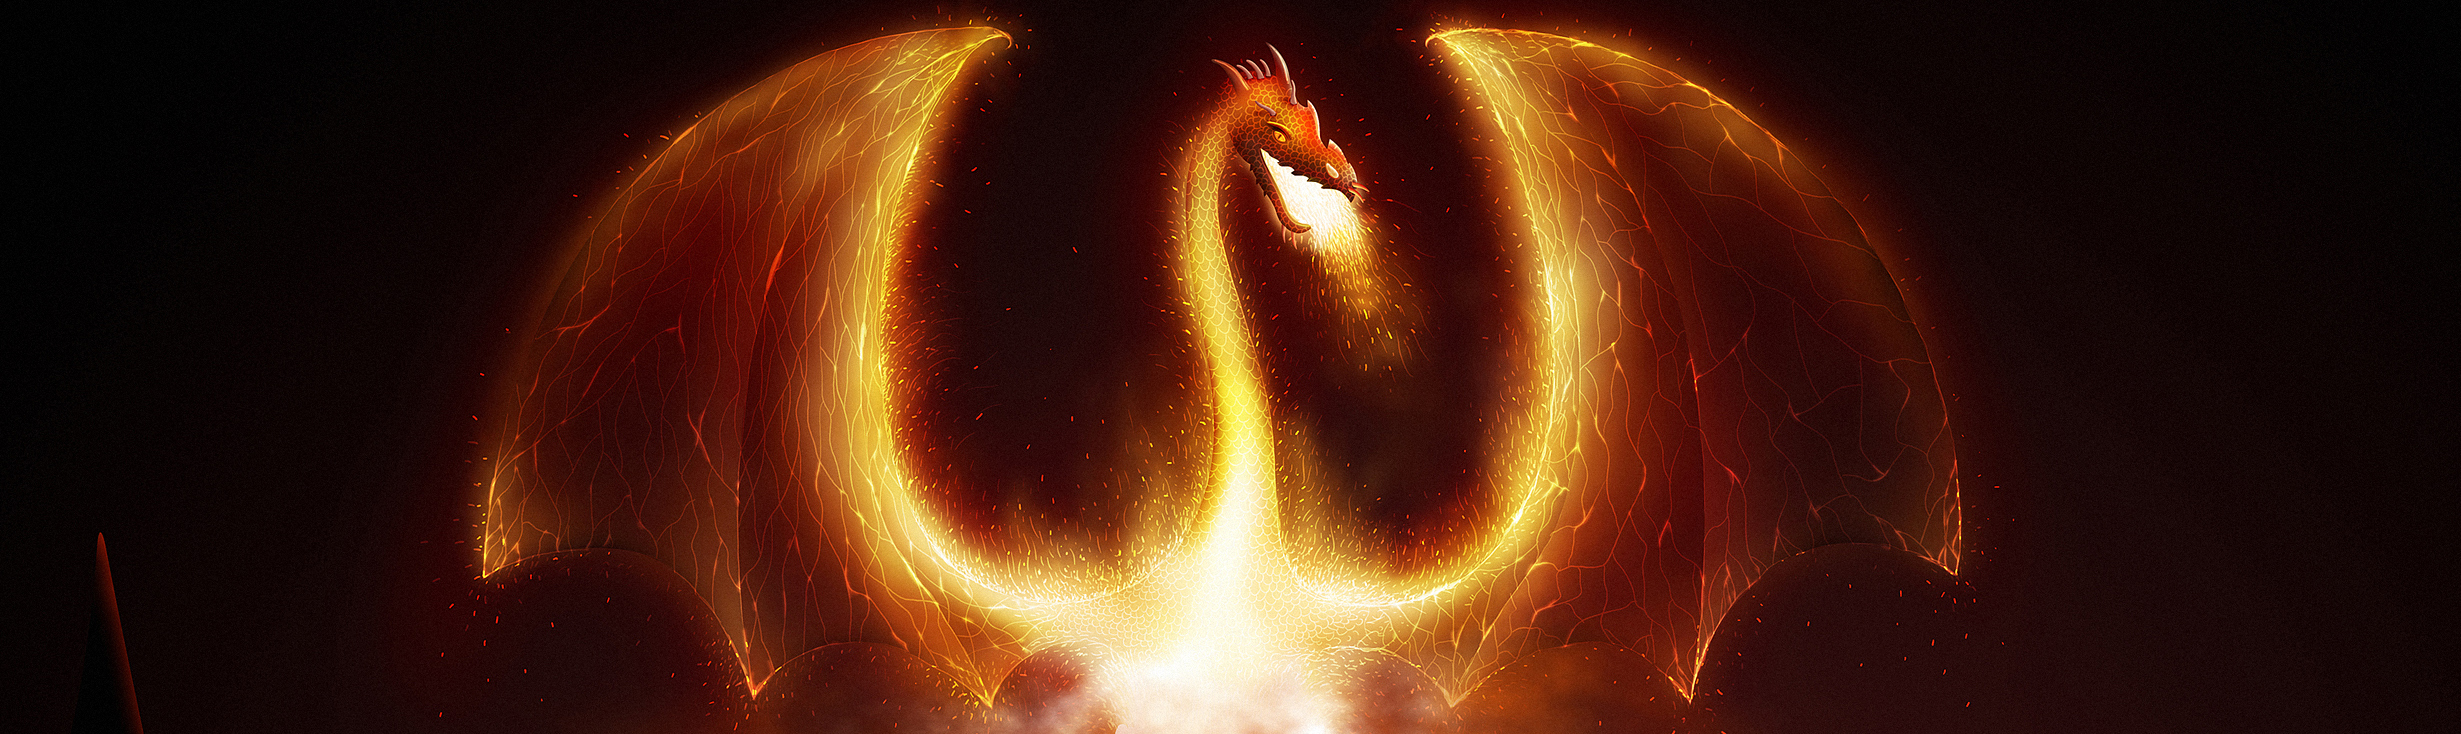 1001-dragon-fire-cropped-banner